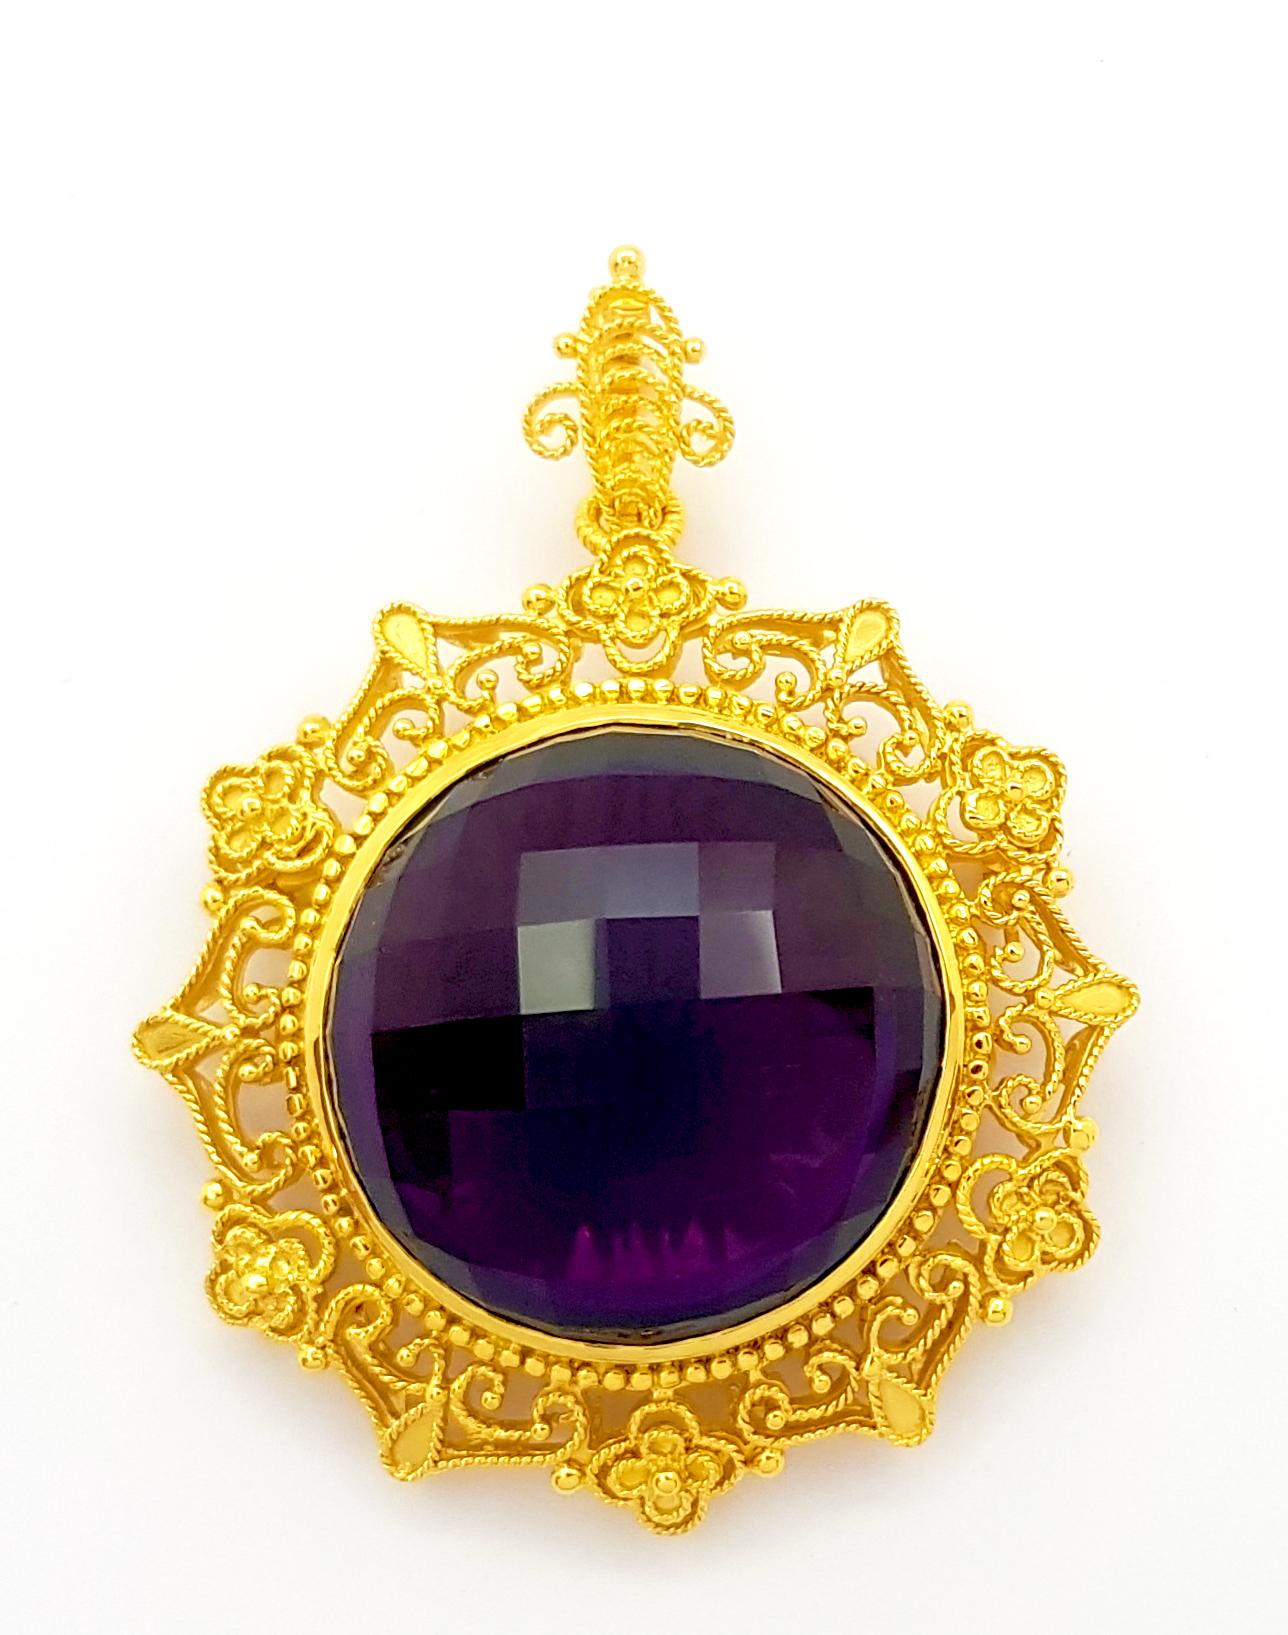 Amethyst 75.37 carats Brooch/Pendant set in 18K Gold Settings
(chain not included)

Width: 4.5 cm 
Length: 6.0 cm
Total Weight: 41.98 grams

